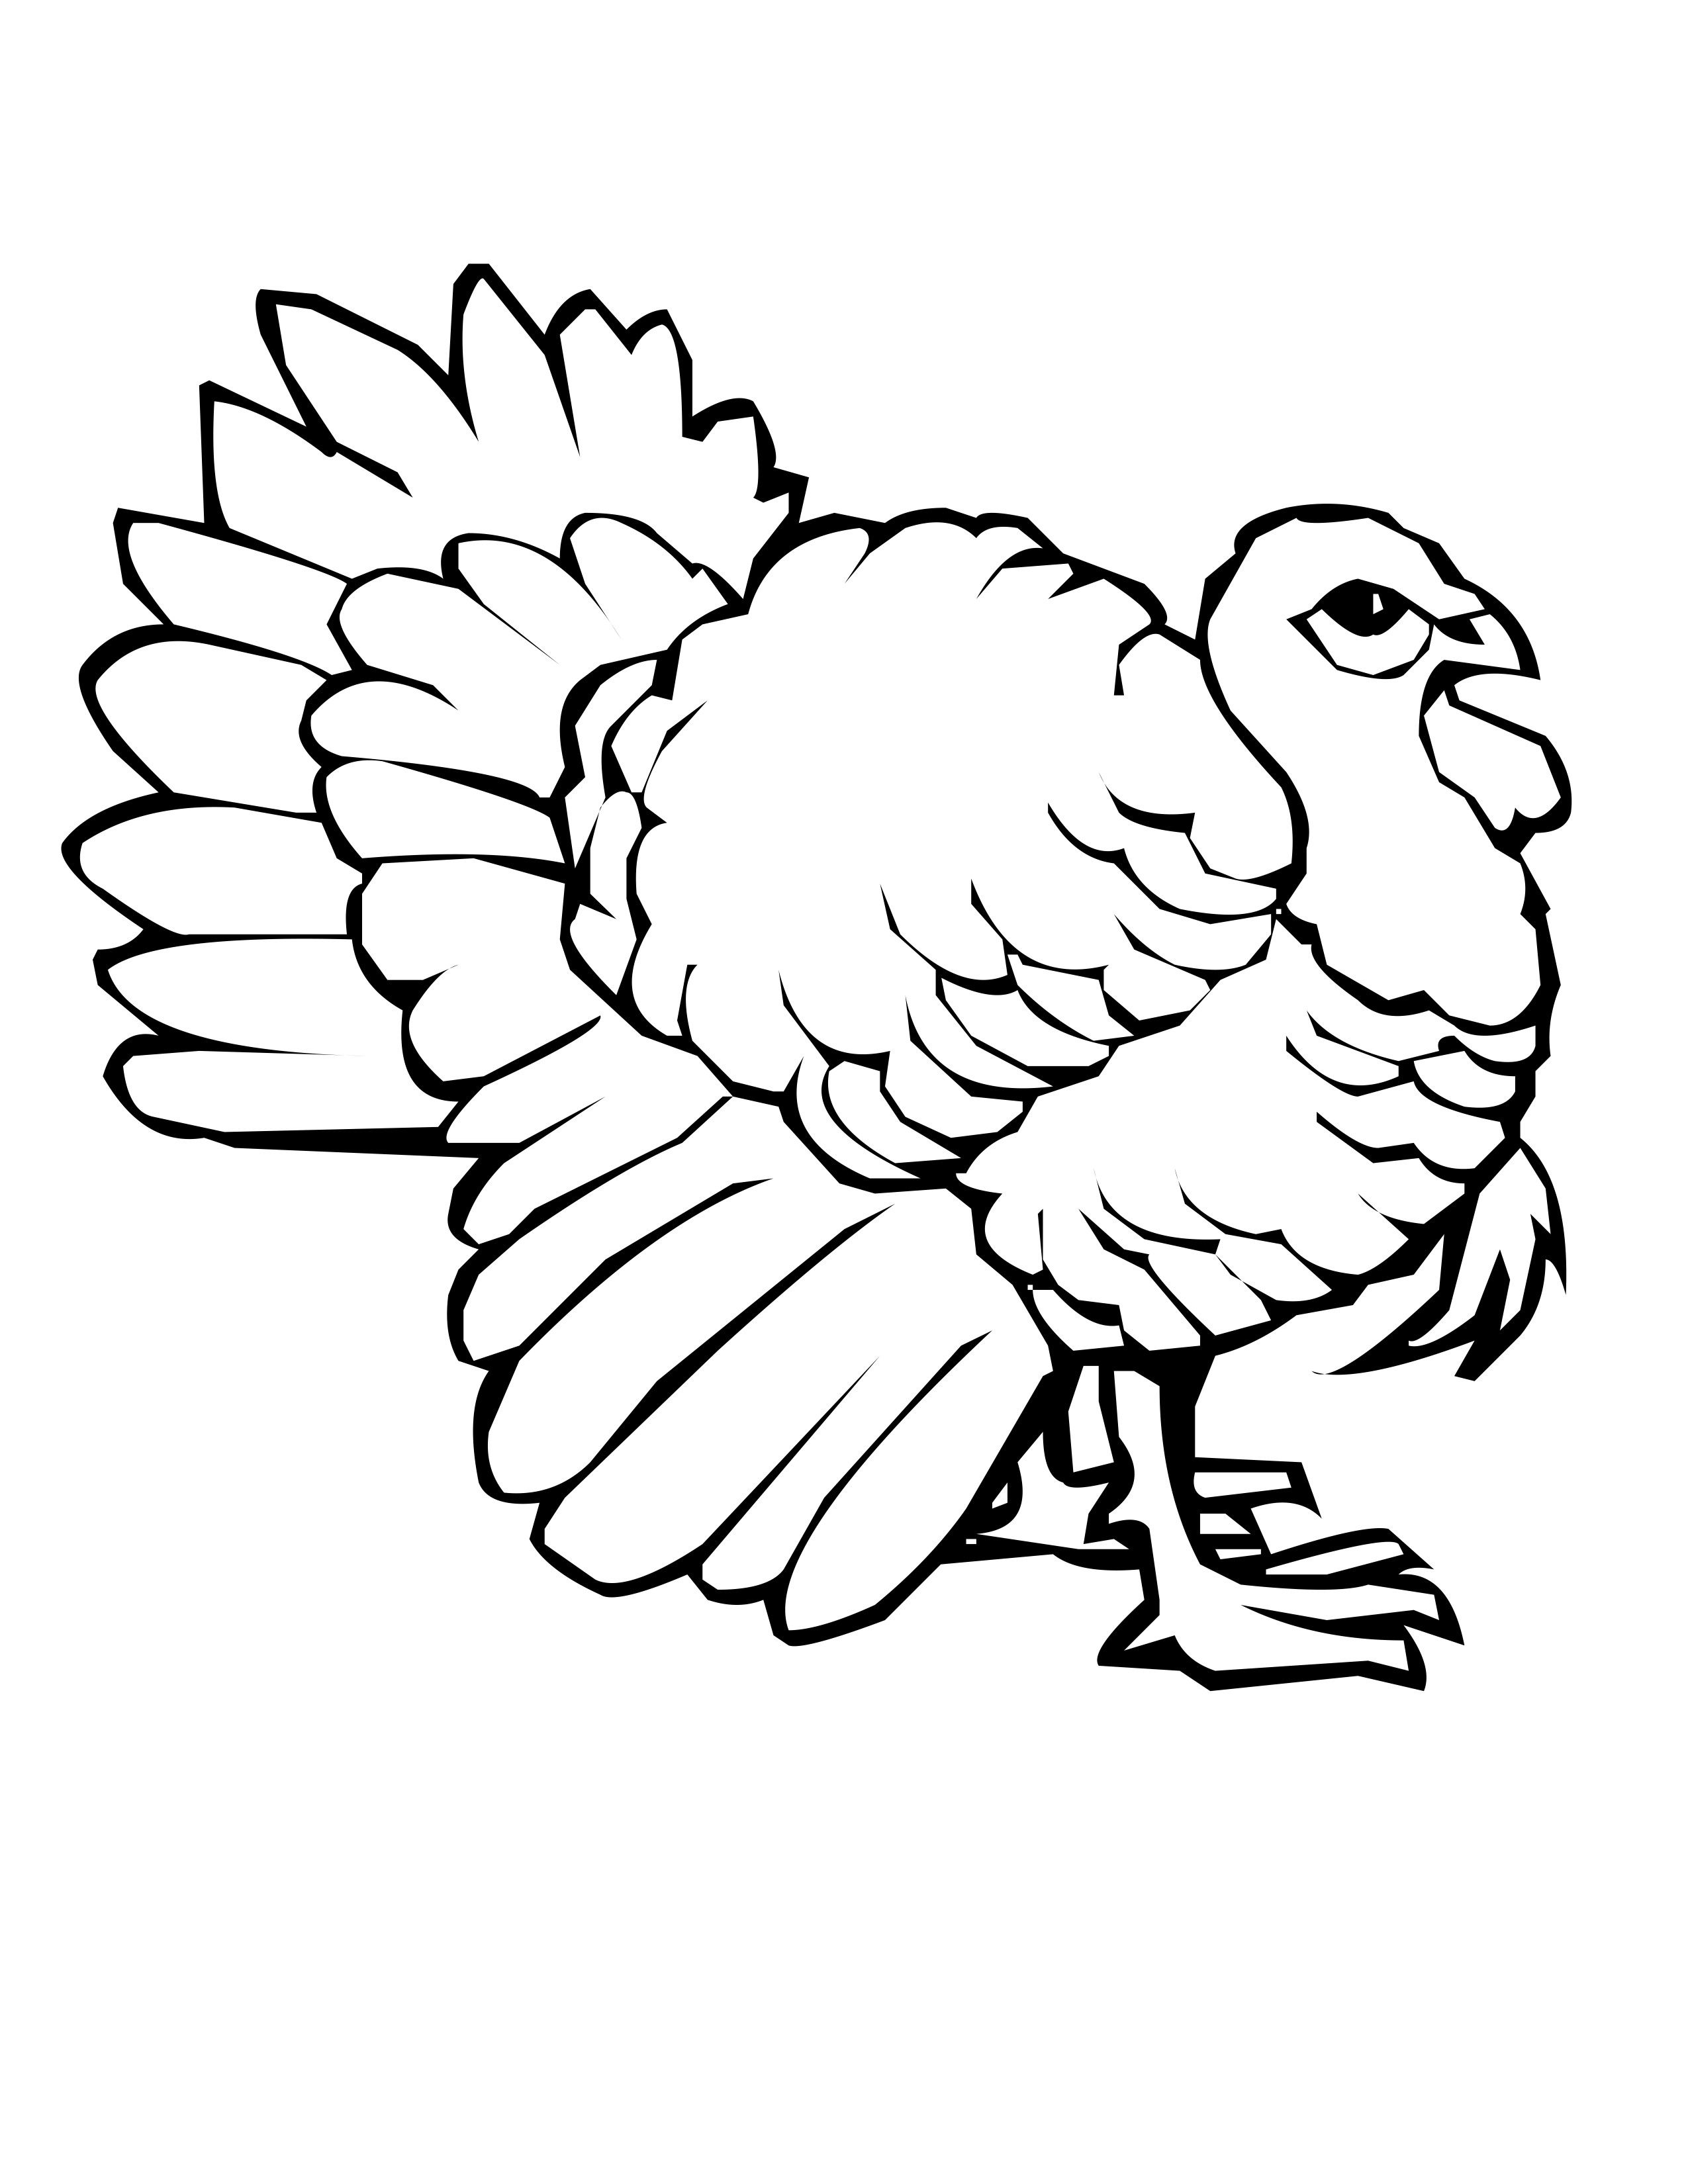 Free Turkey Drawing Picture, Download Free Clip Art, Free Clip Art on Clipart Library